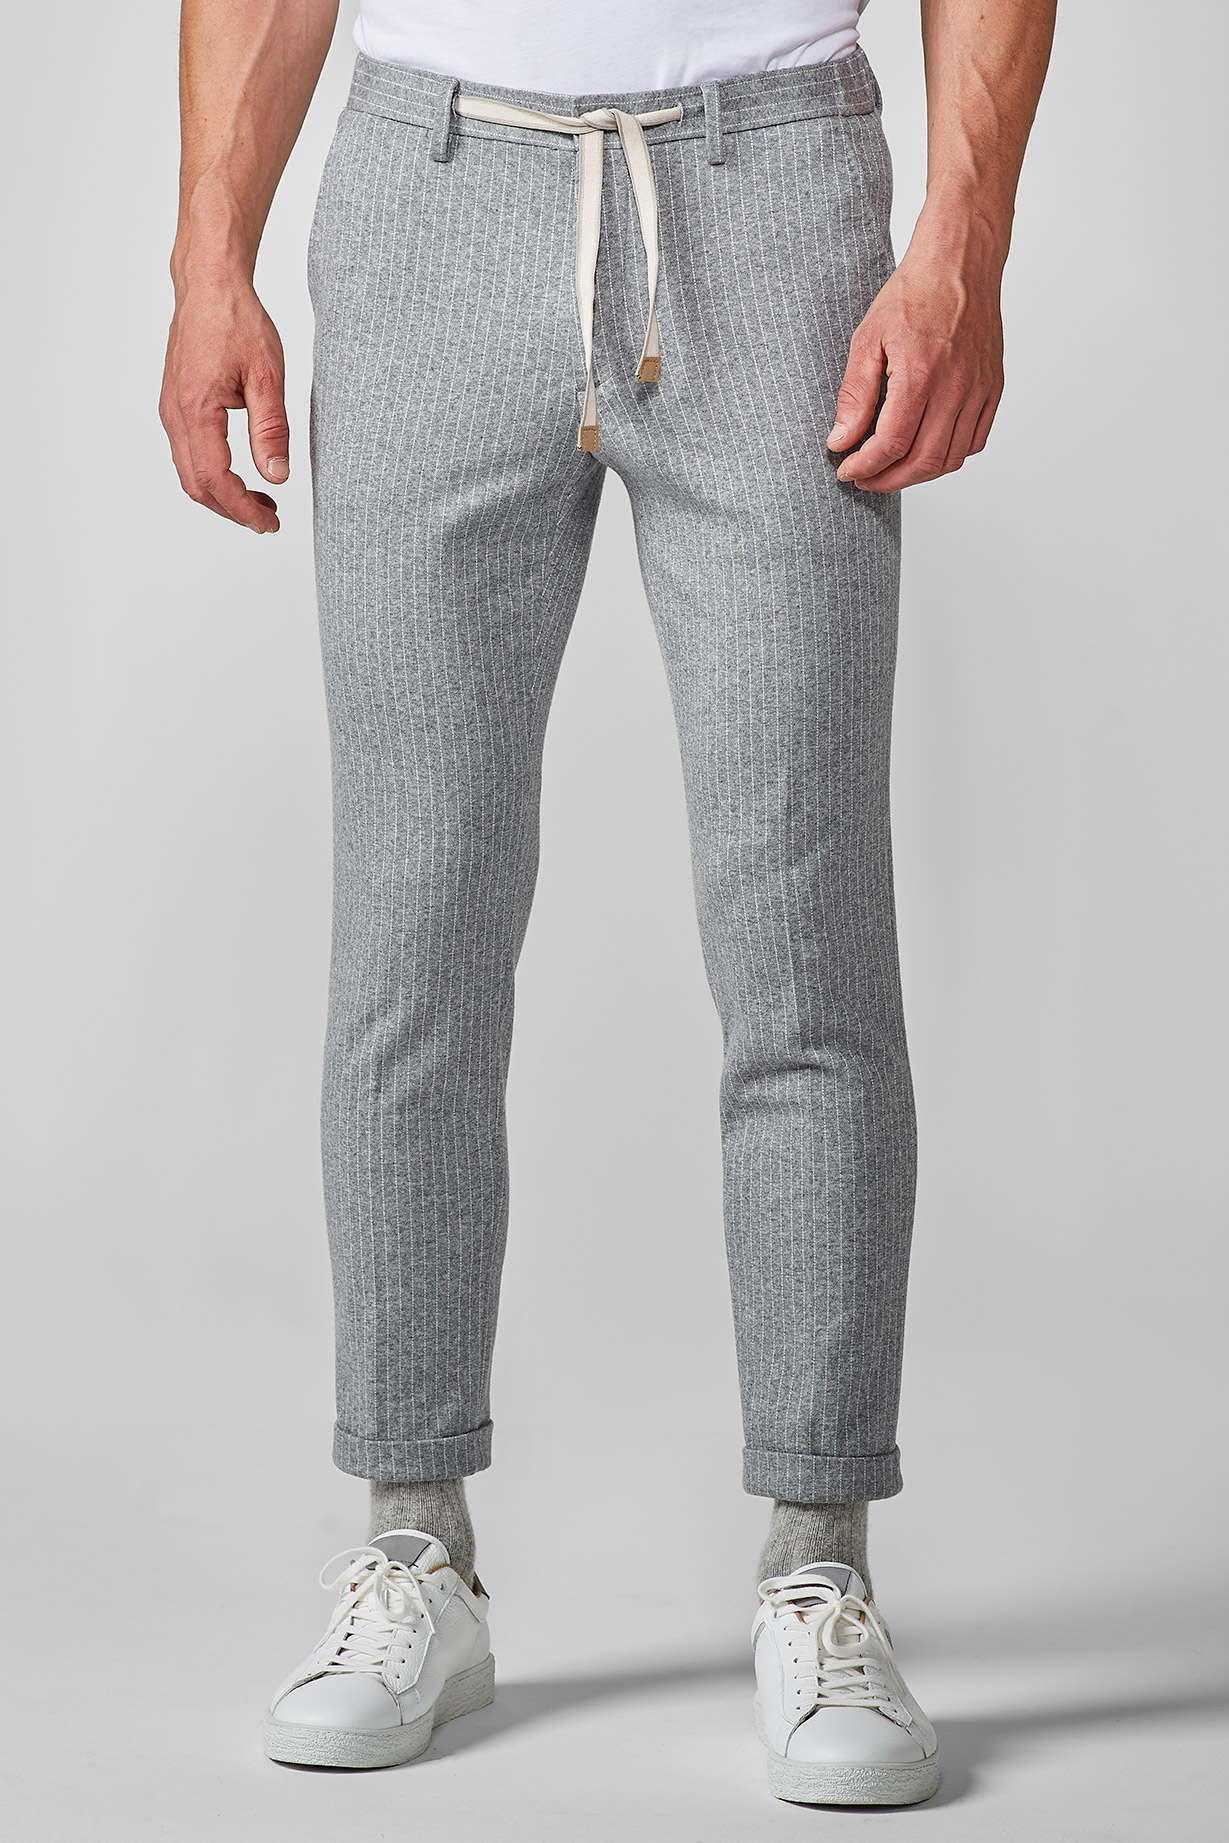 GREY PINSTRIPED LACE-UP JERSEY TROUSER